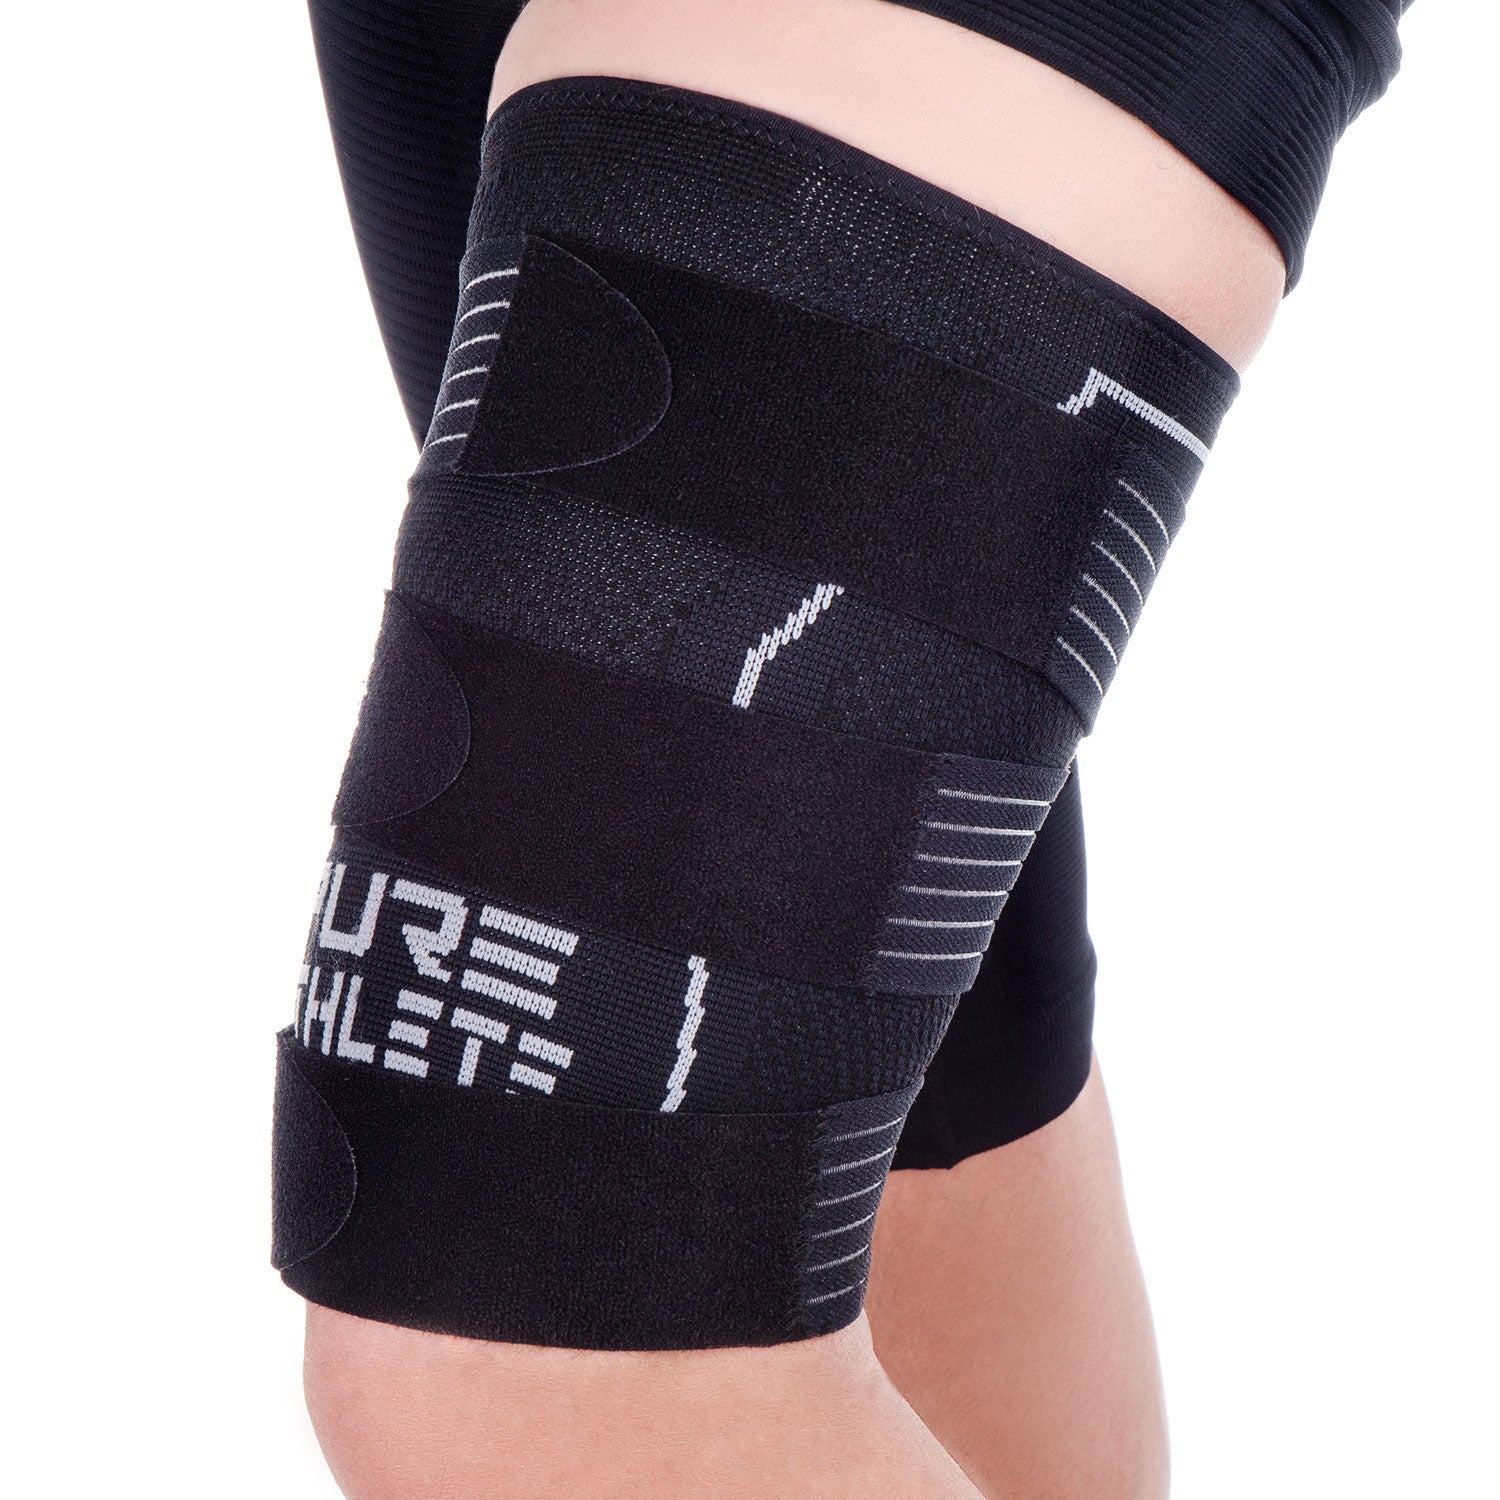 Thigh Compression Sleeve with Adjustable Strap